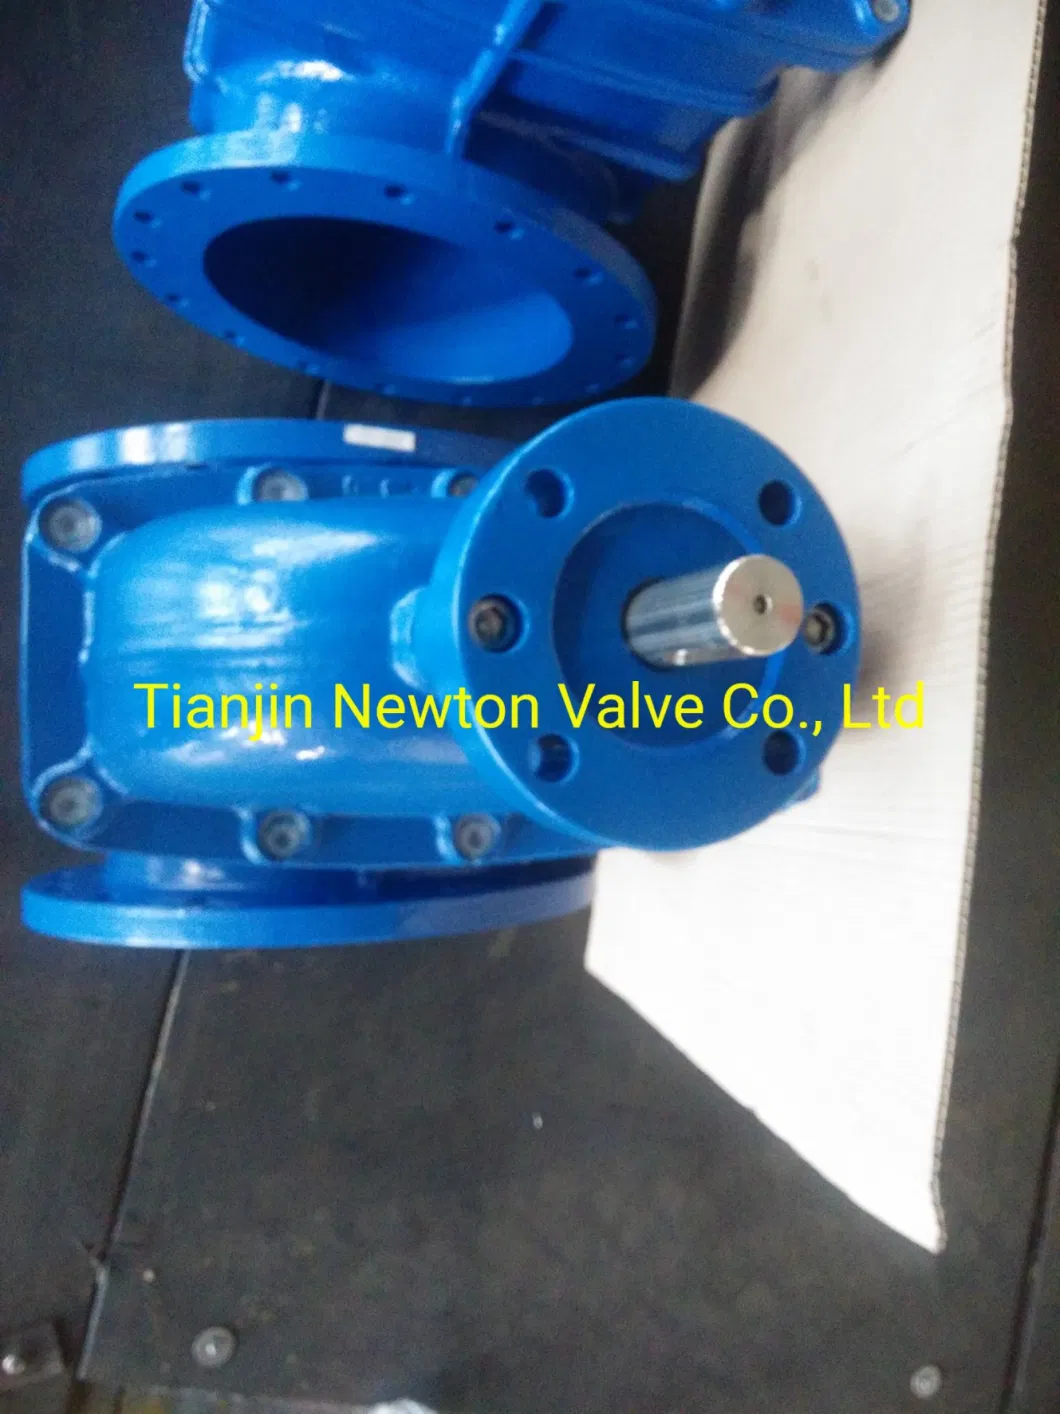 Resilient Seat Gate Valve DIN3352 F4 F5 with by Pass Valve Gearbox with Top Flange ISO 5210 ISO 5211 Mounting Pad with Electric Actuator Chain Handwheel Gearbox